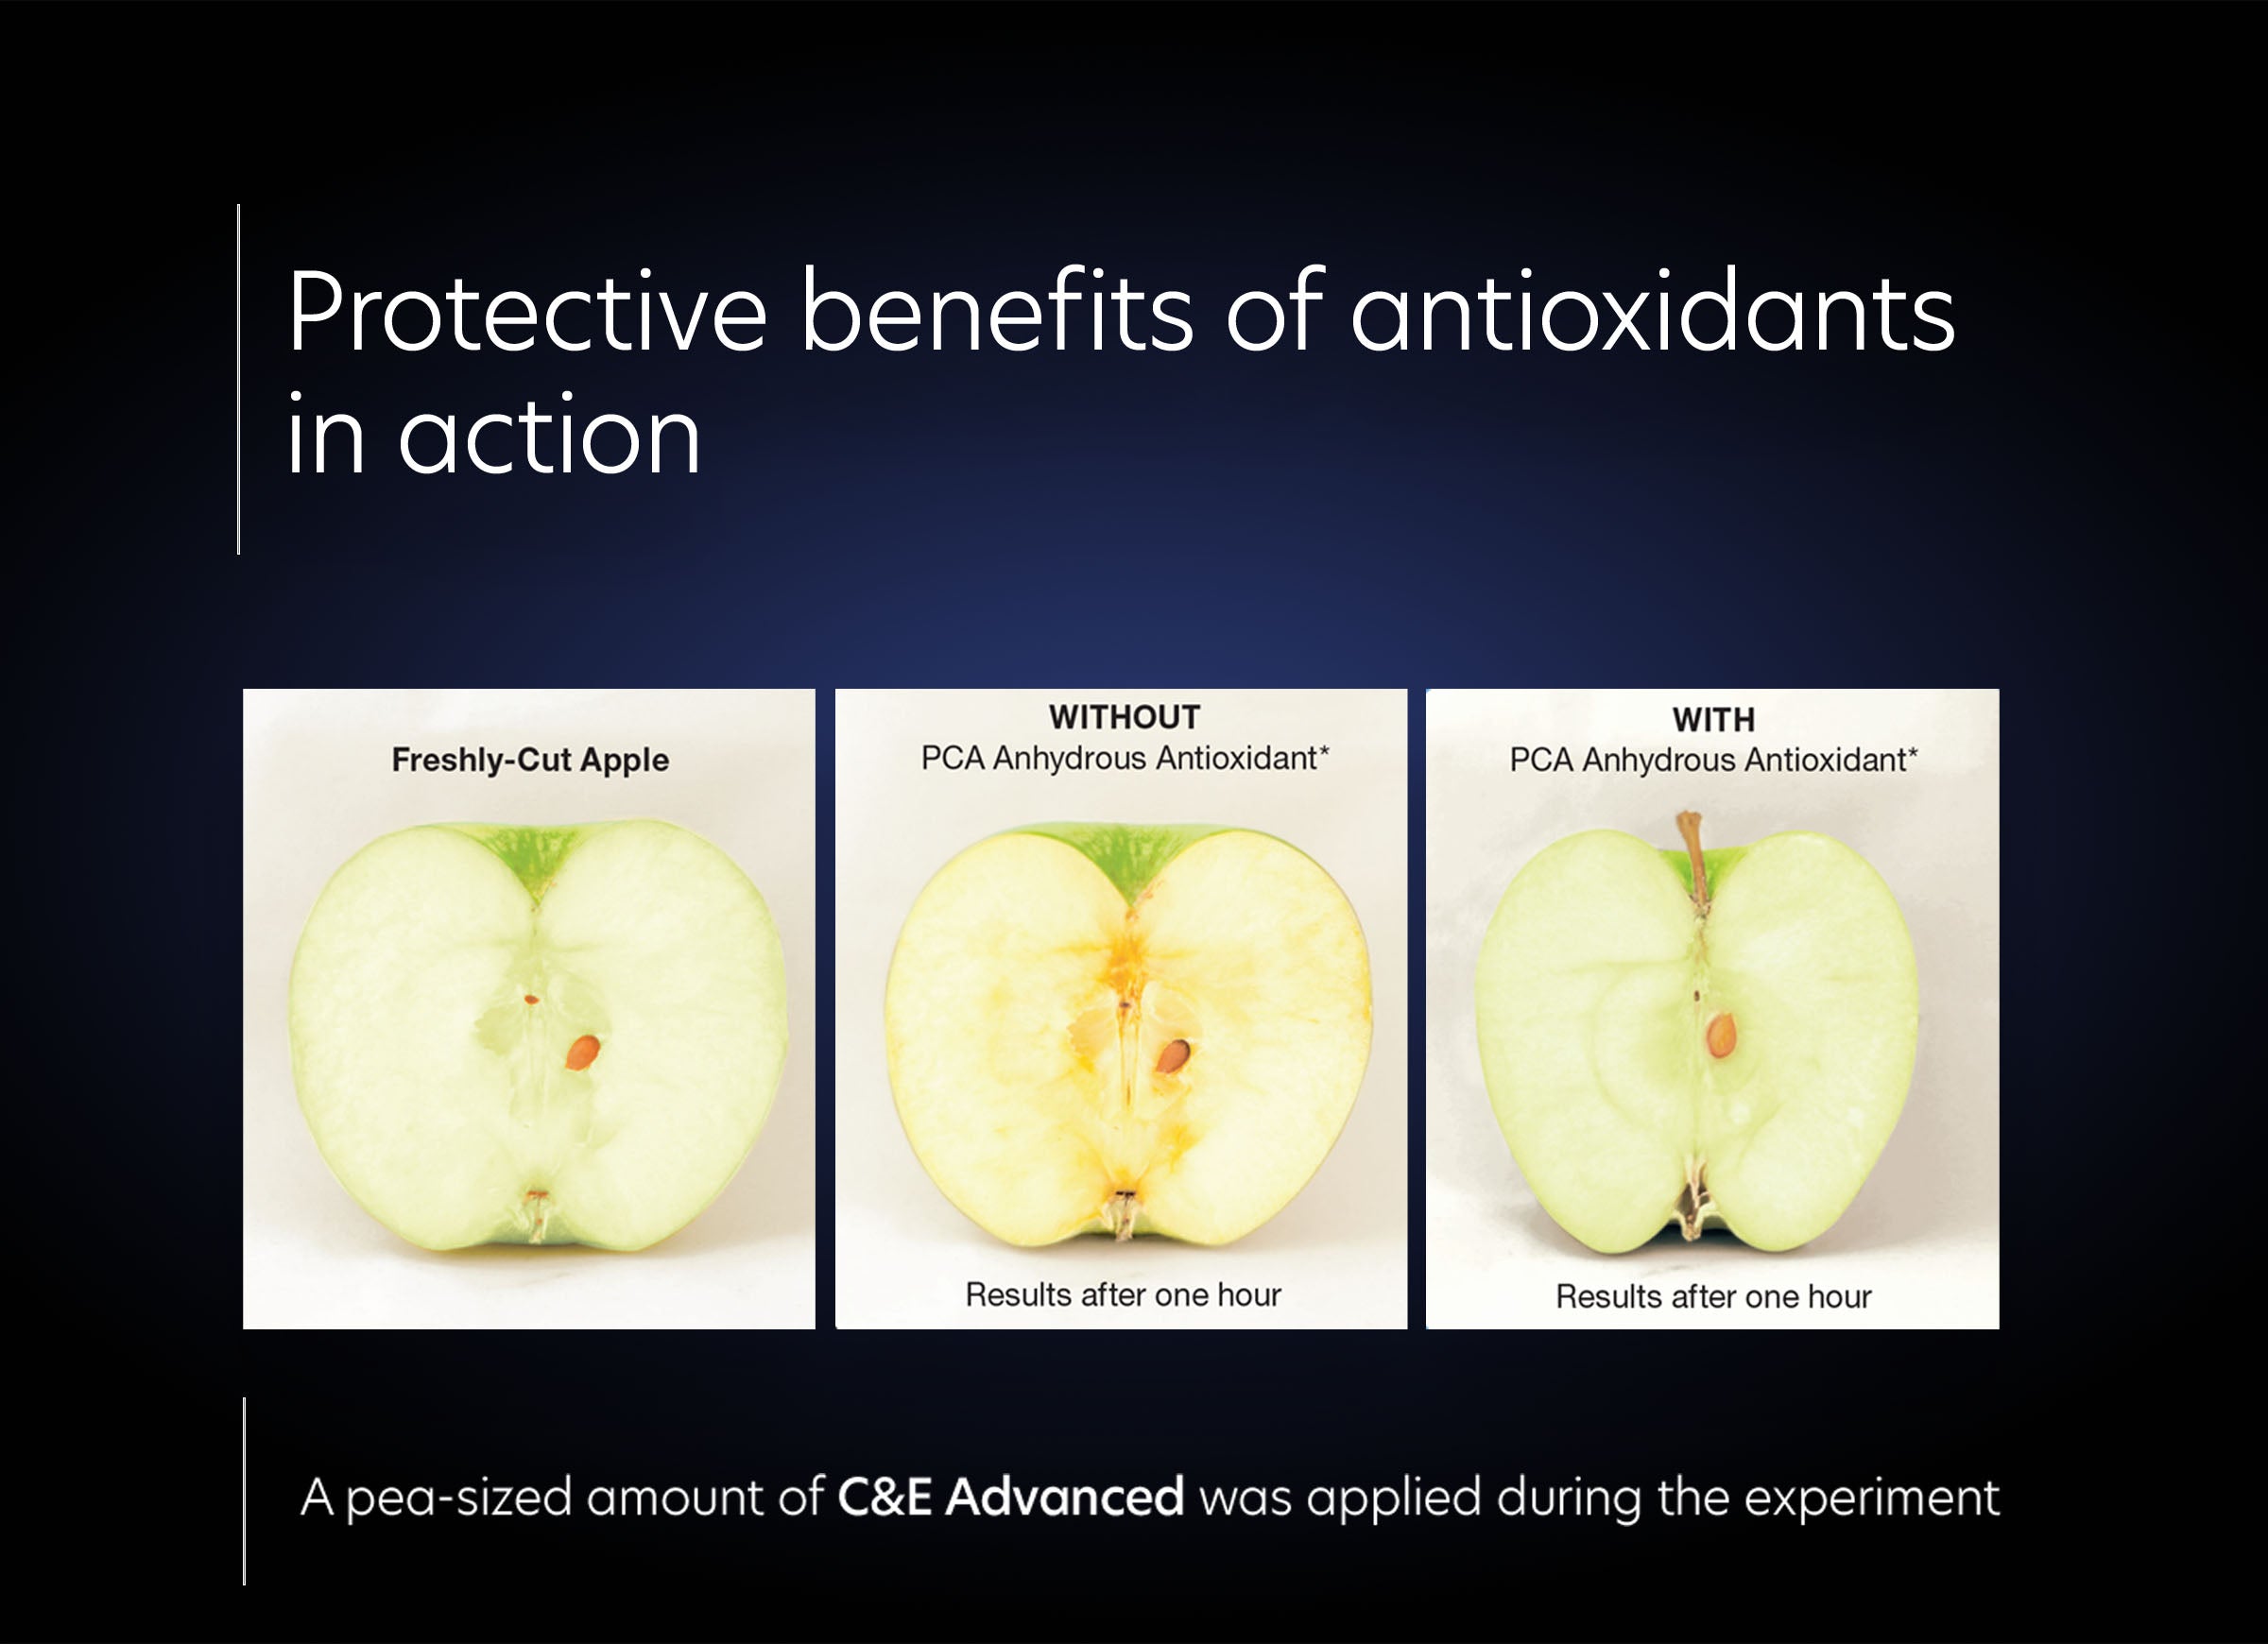 C&E Advanced - Protective benefits of antioxidants in action